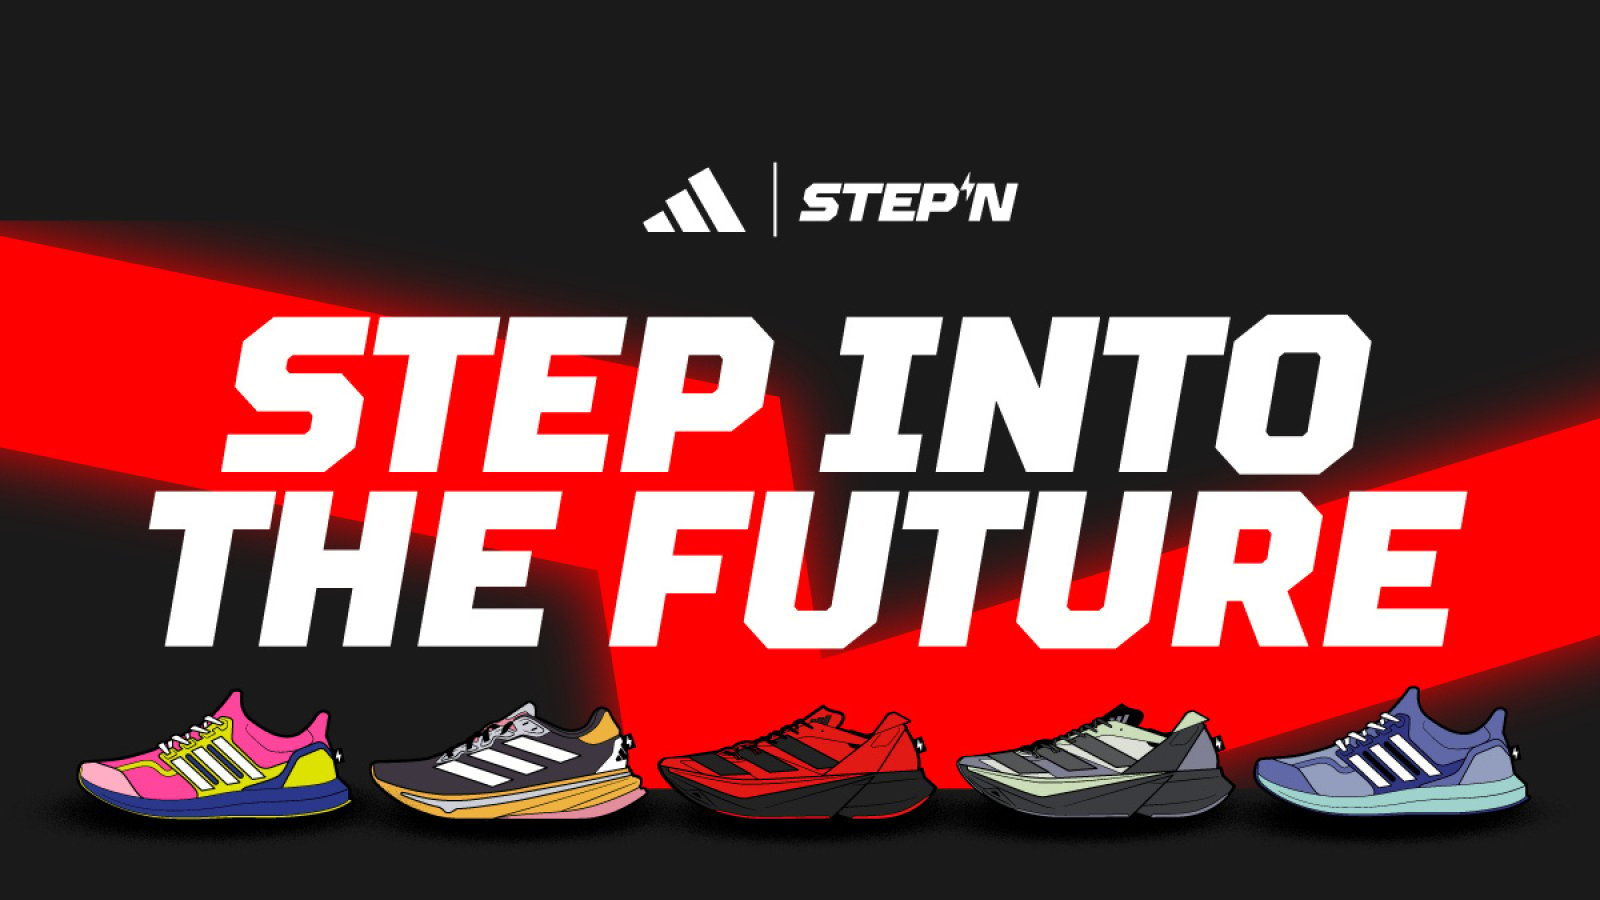 STEPN partners with adidas on exclusive NFT sneakers